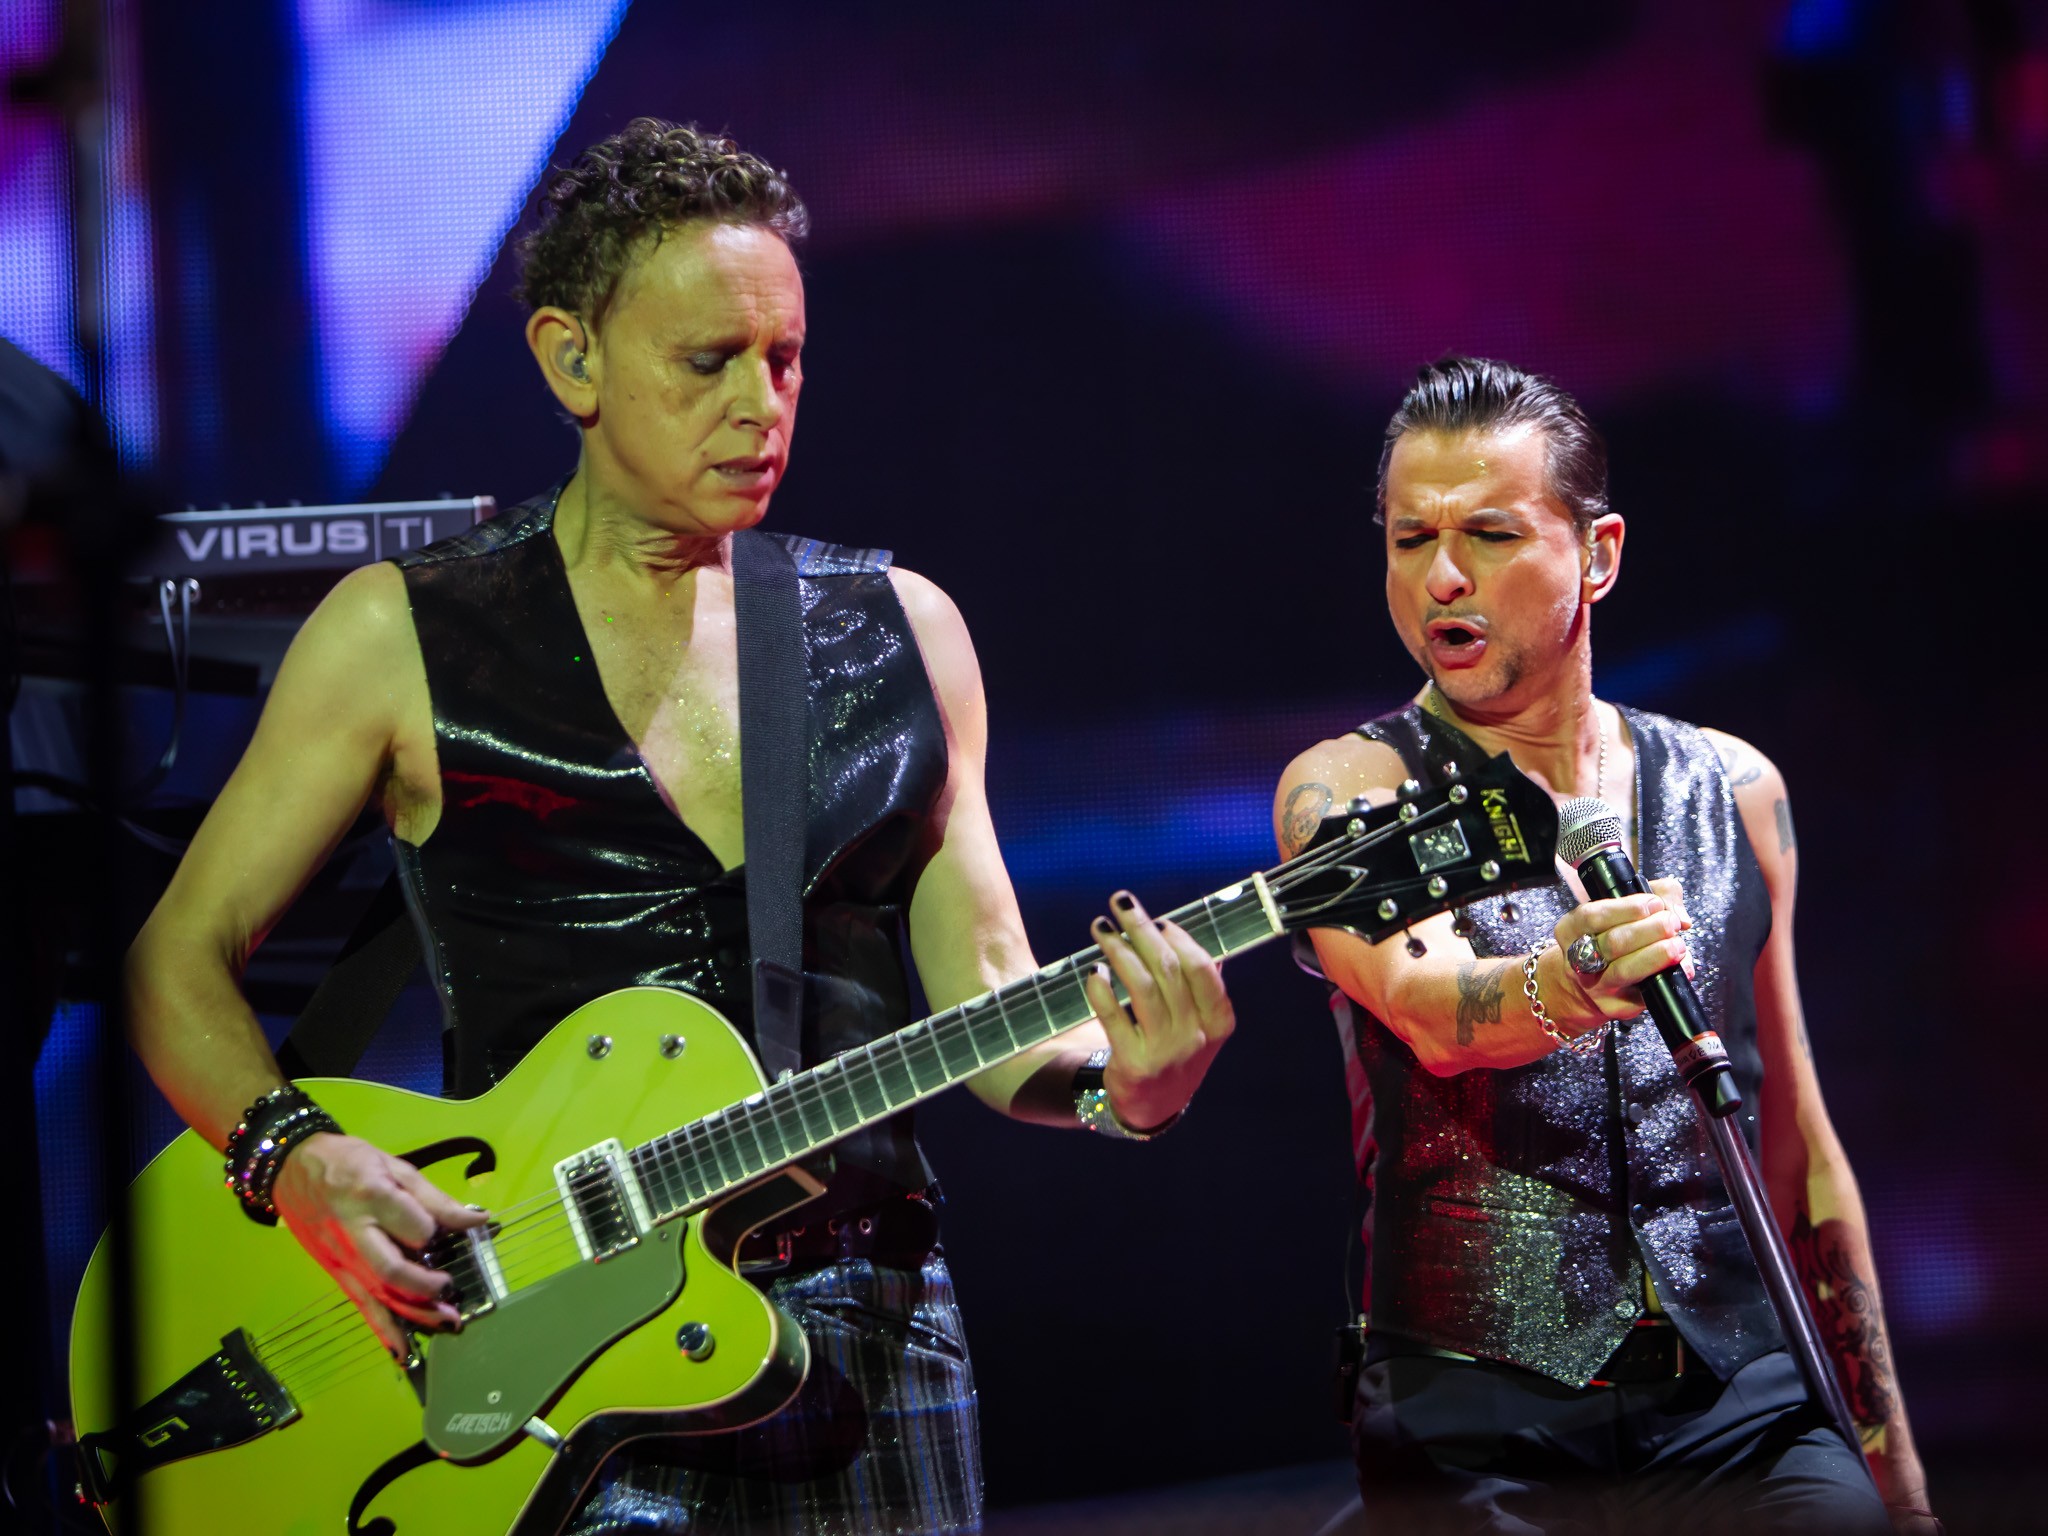 Depeche Mode by Bullet-ray Photography